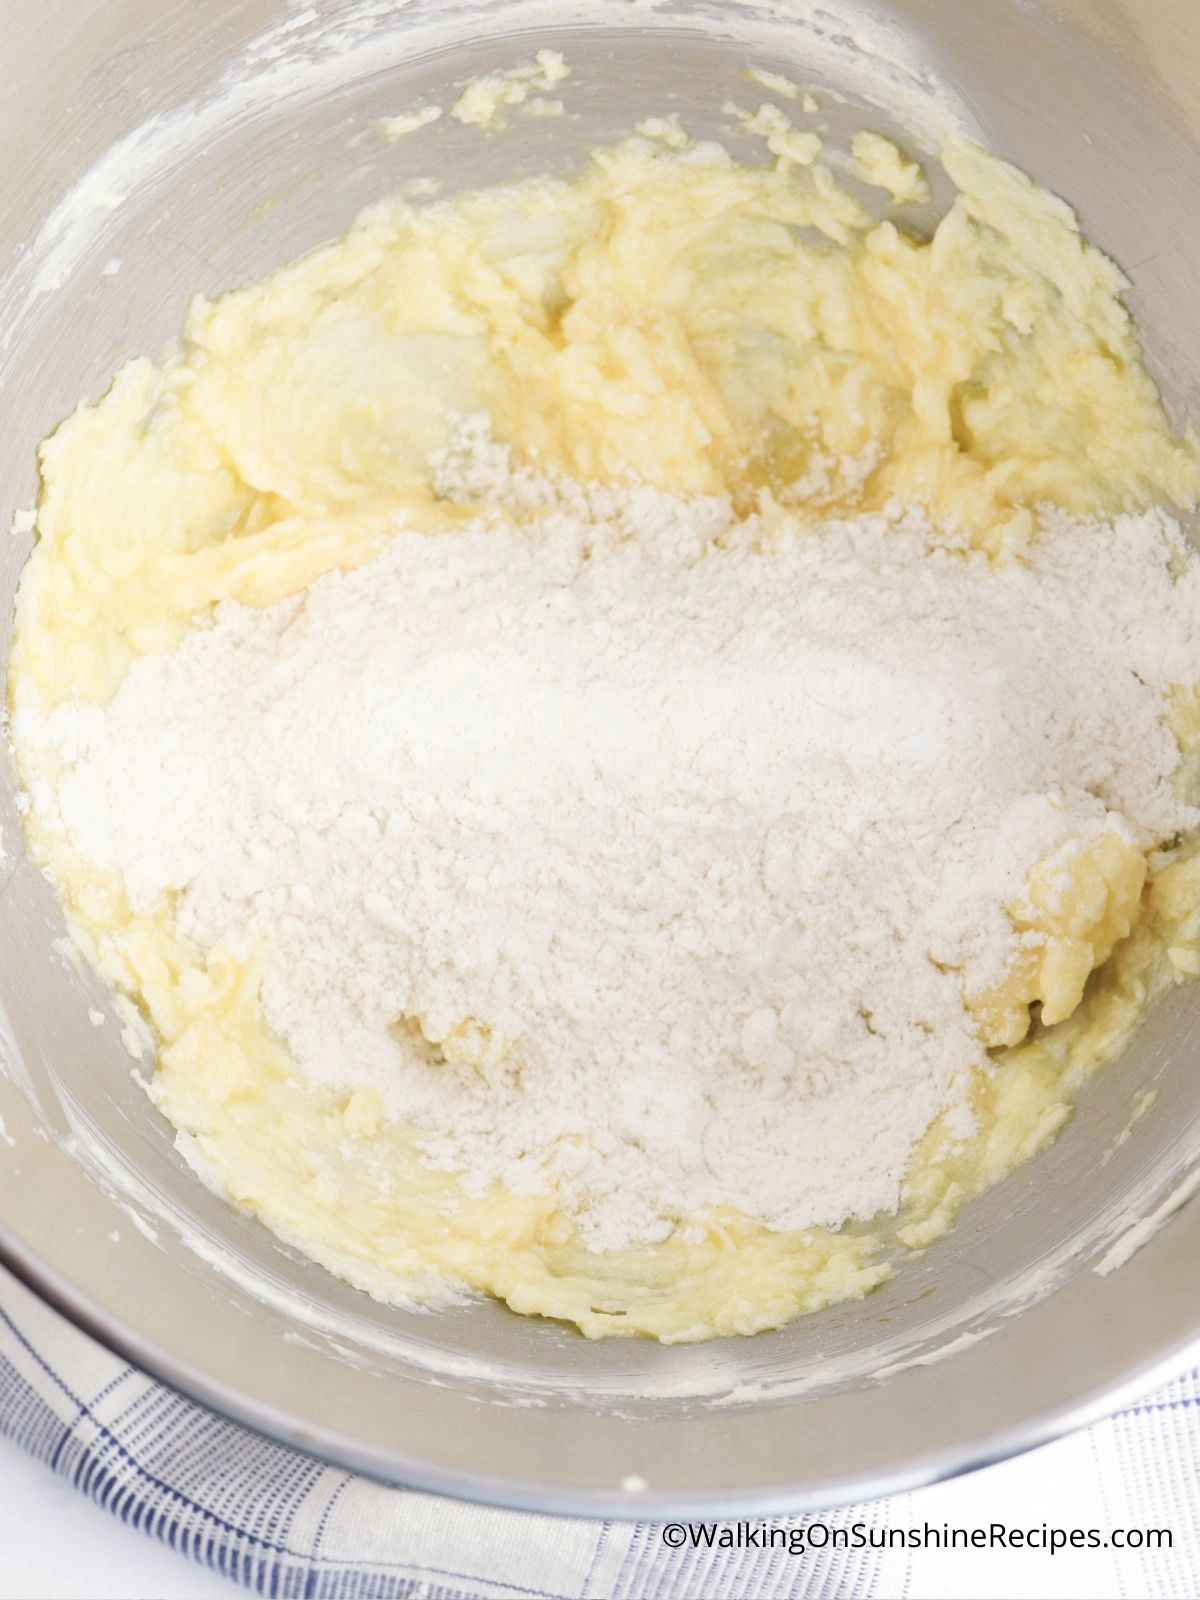 Dry ingredients with butter mixture.